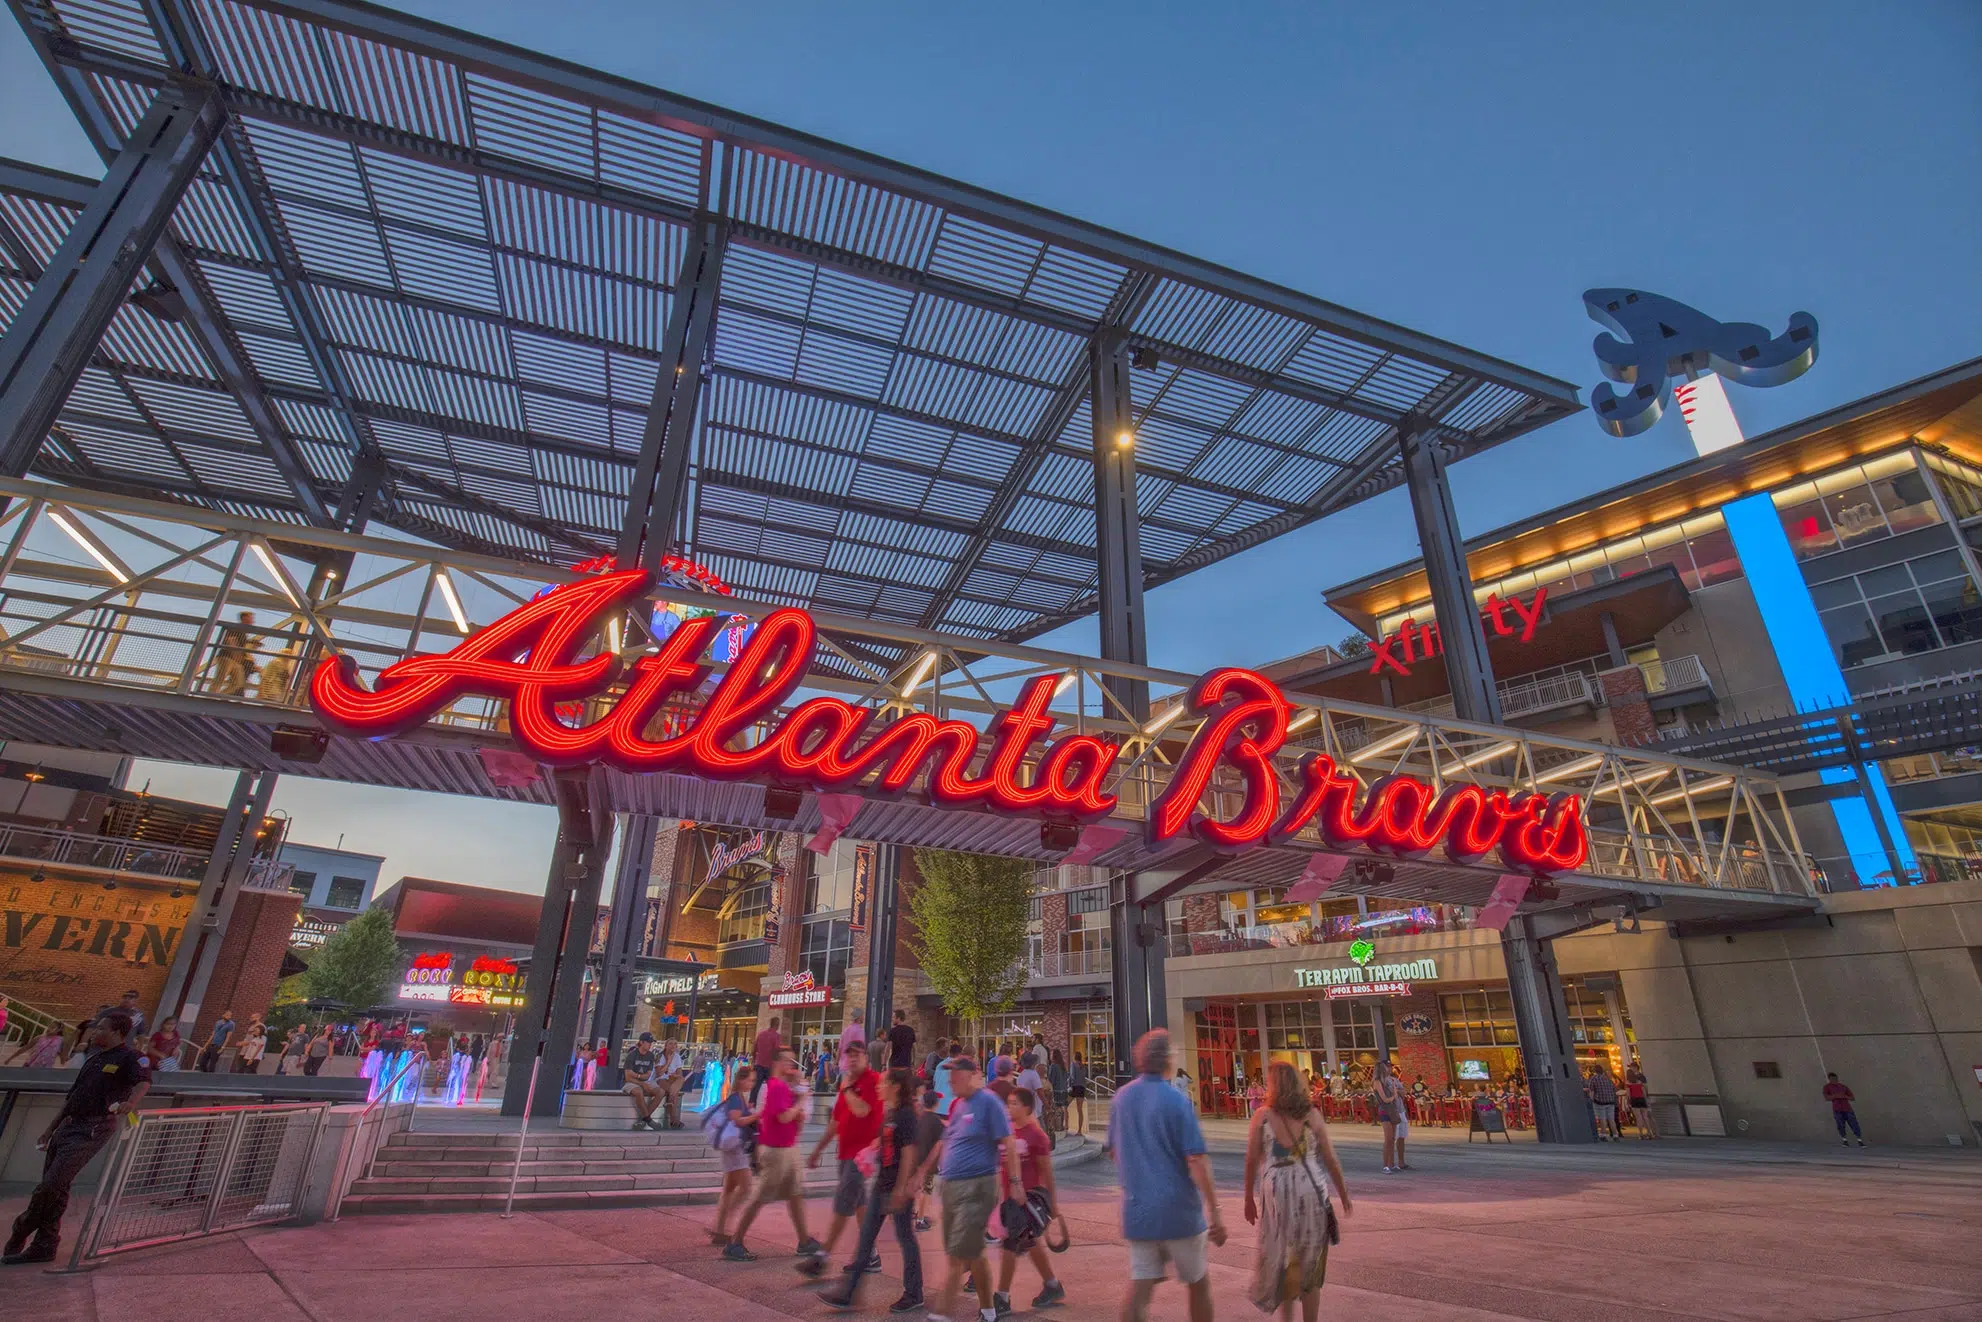 Our Review Of SunTrust Park, Home Of The Atlanta Braves